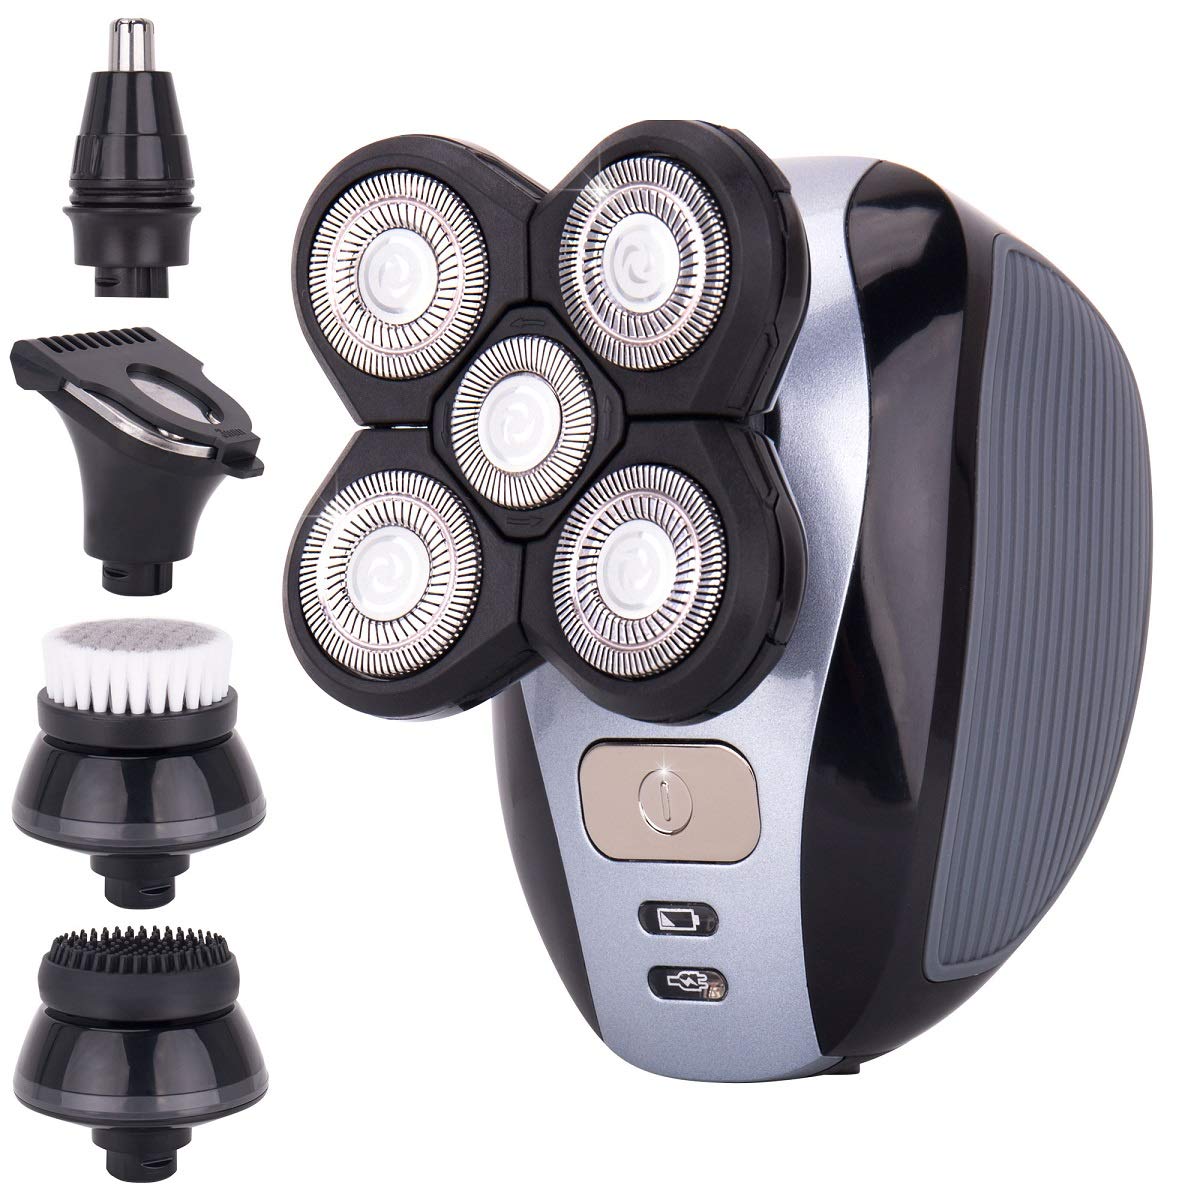 AsaVea 5-in-1 Electric Shaver & Grooming Kit